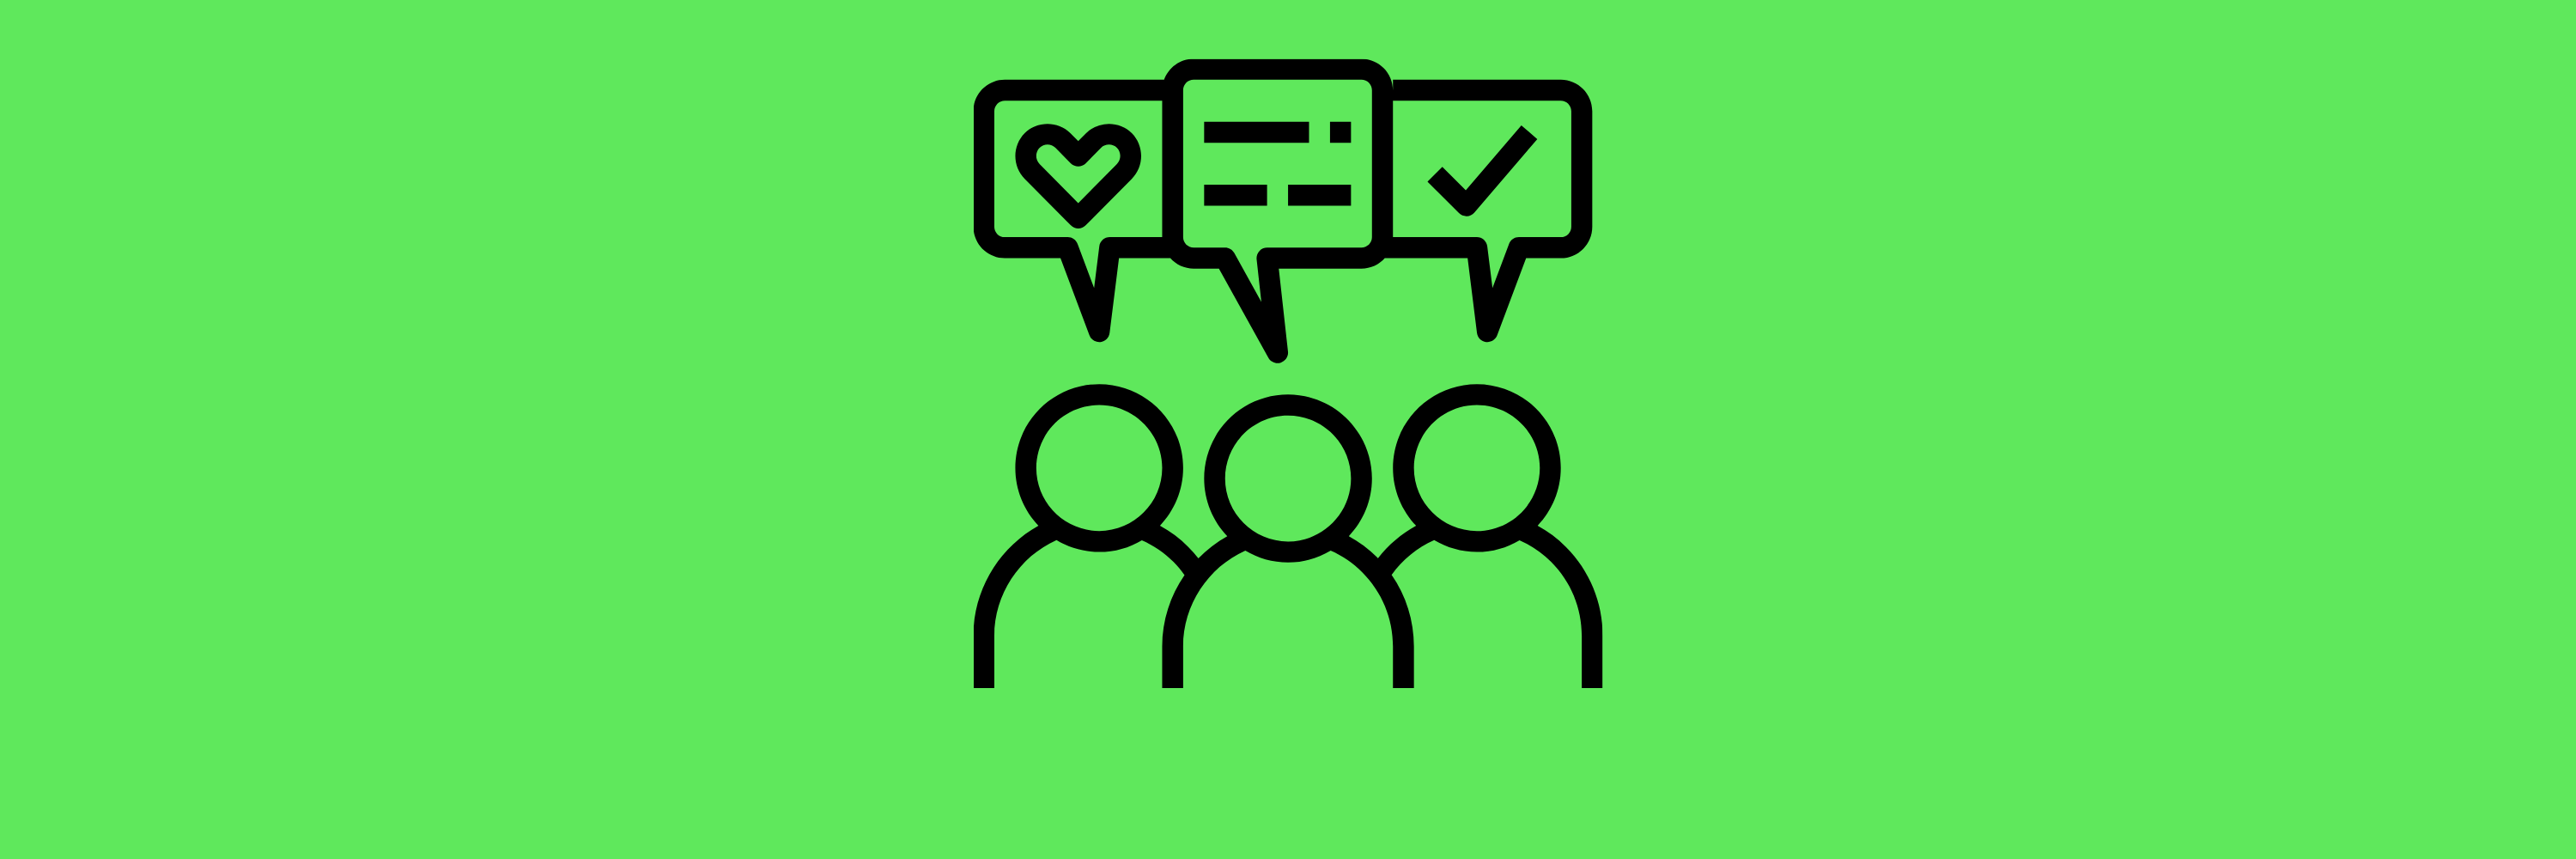 Icon on green background representing audience engagement tools